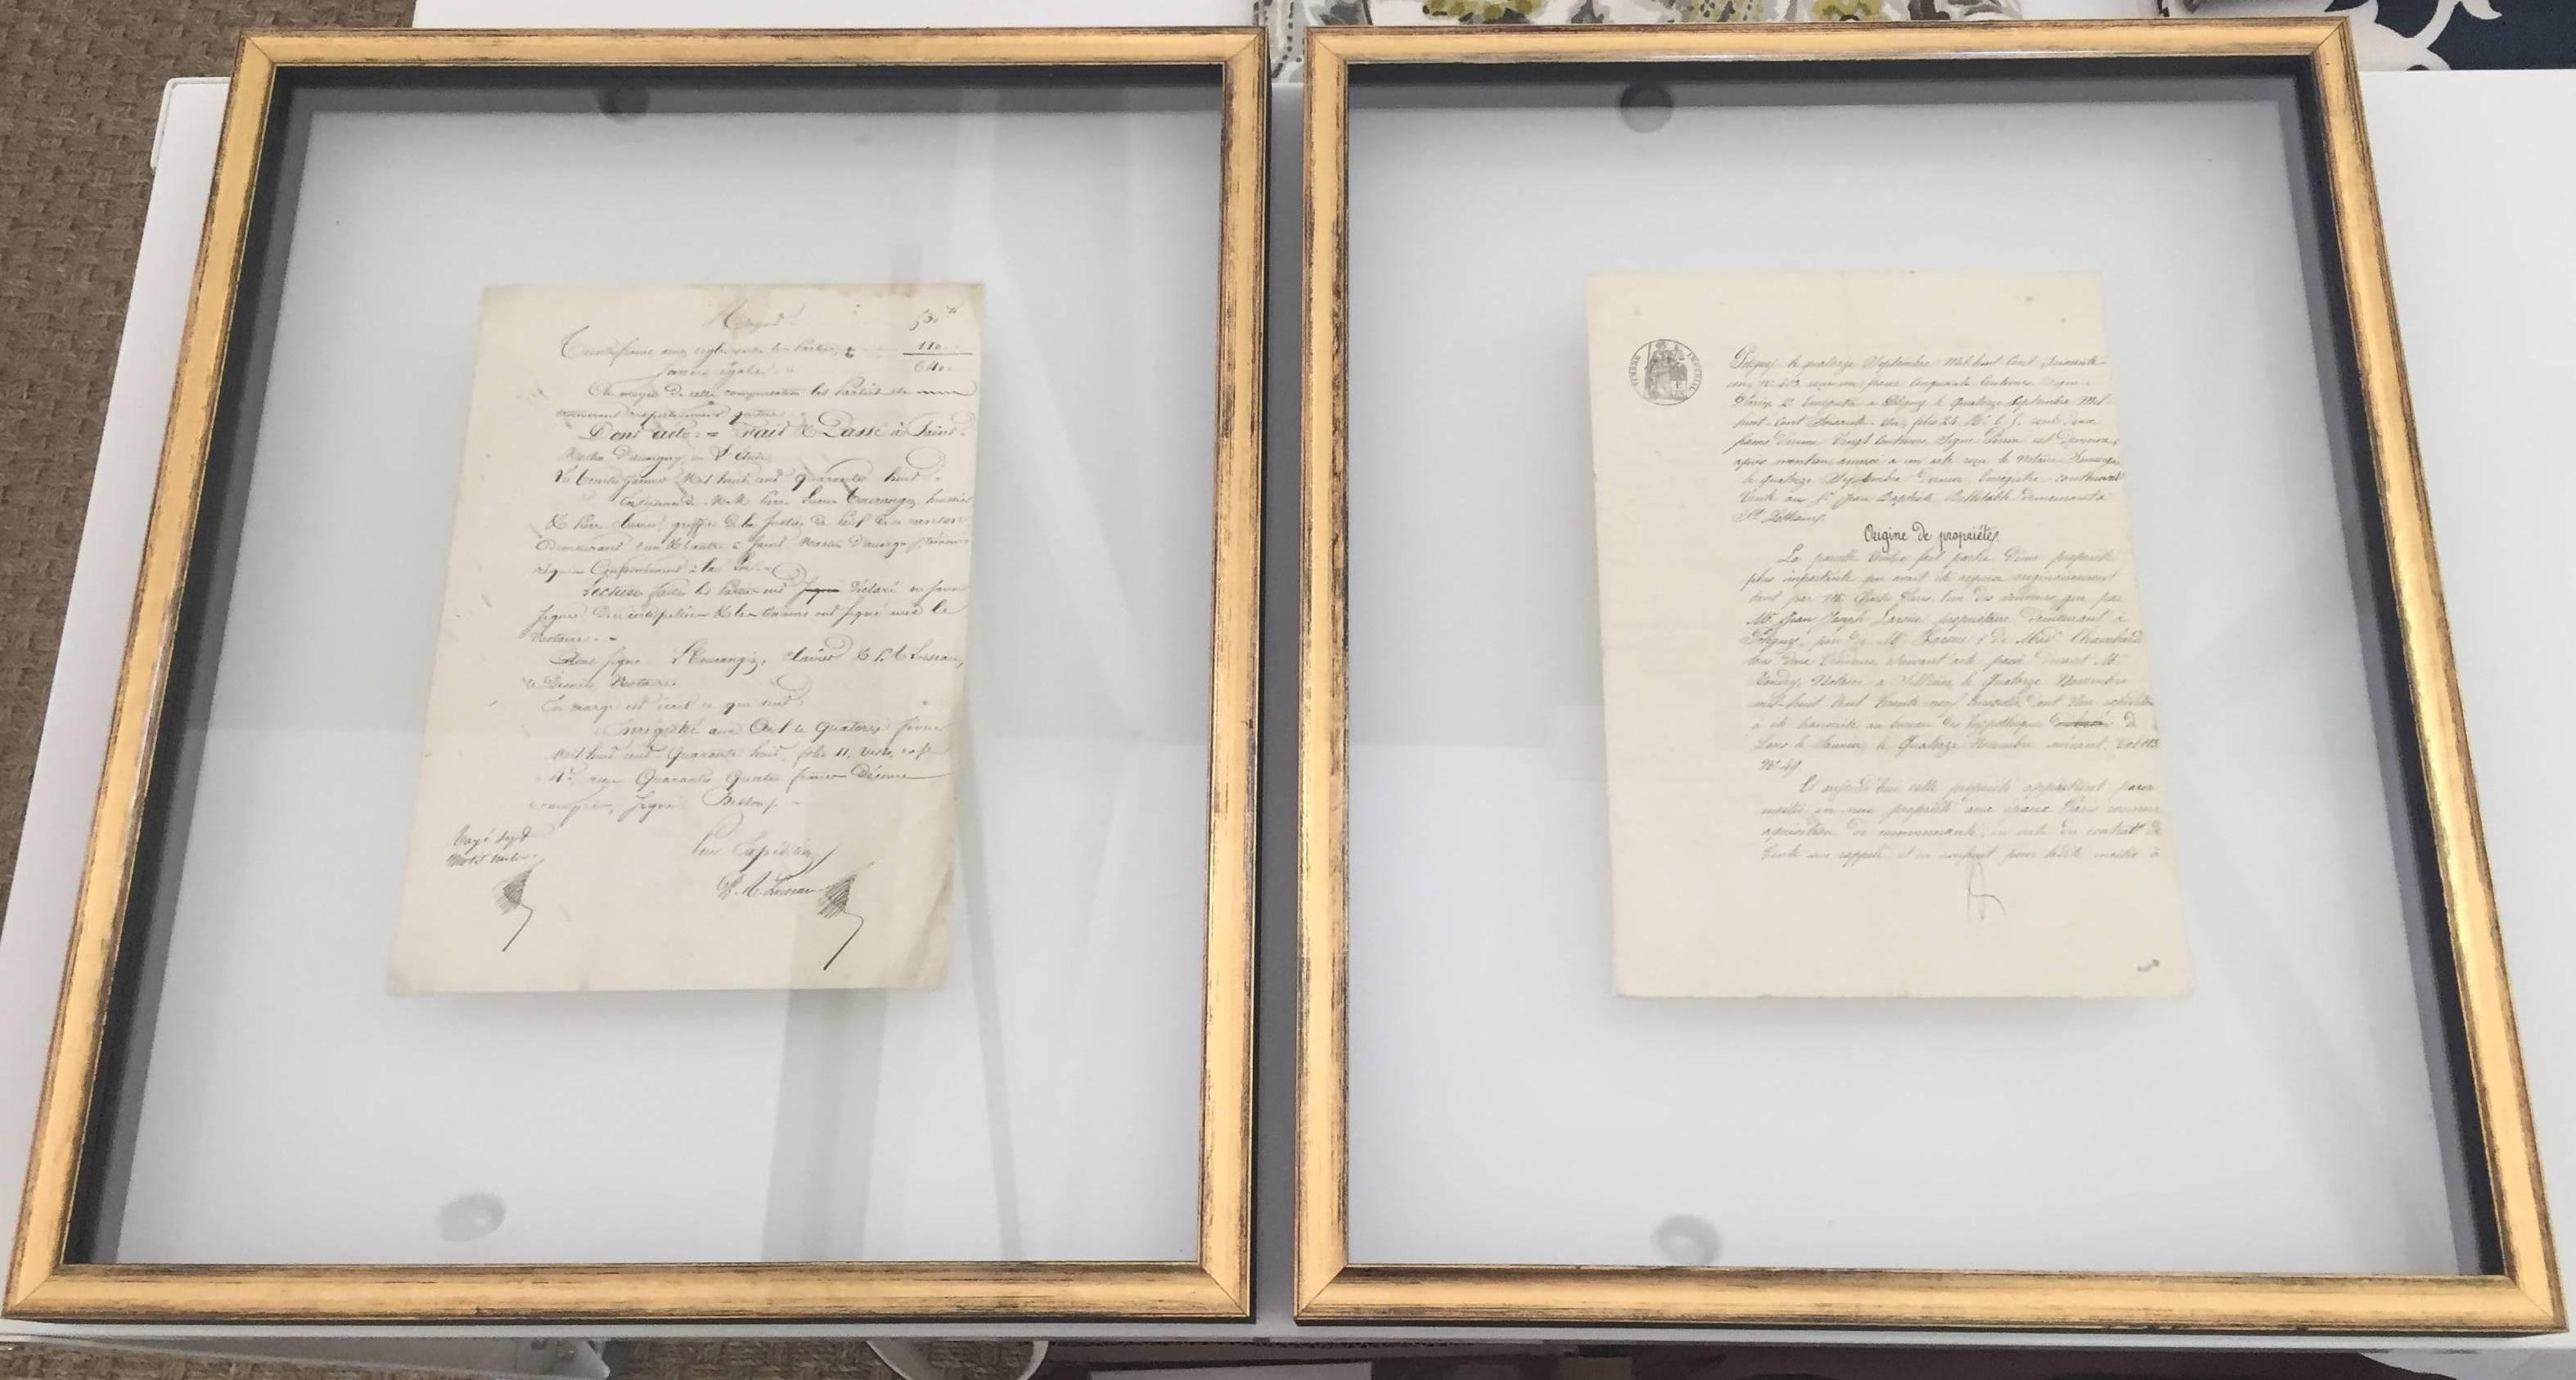 Pair of floating French manuscripts between two panes of glass in gold with black edged shadow box frames.